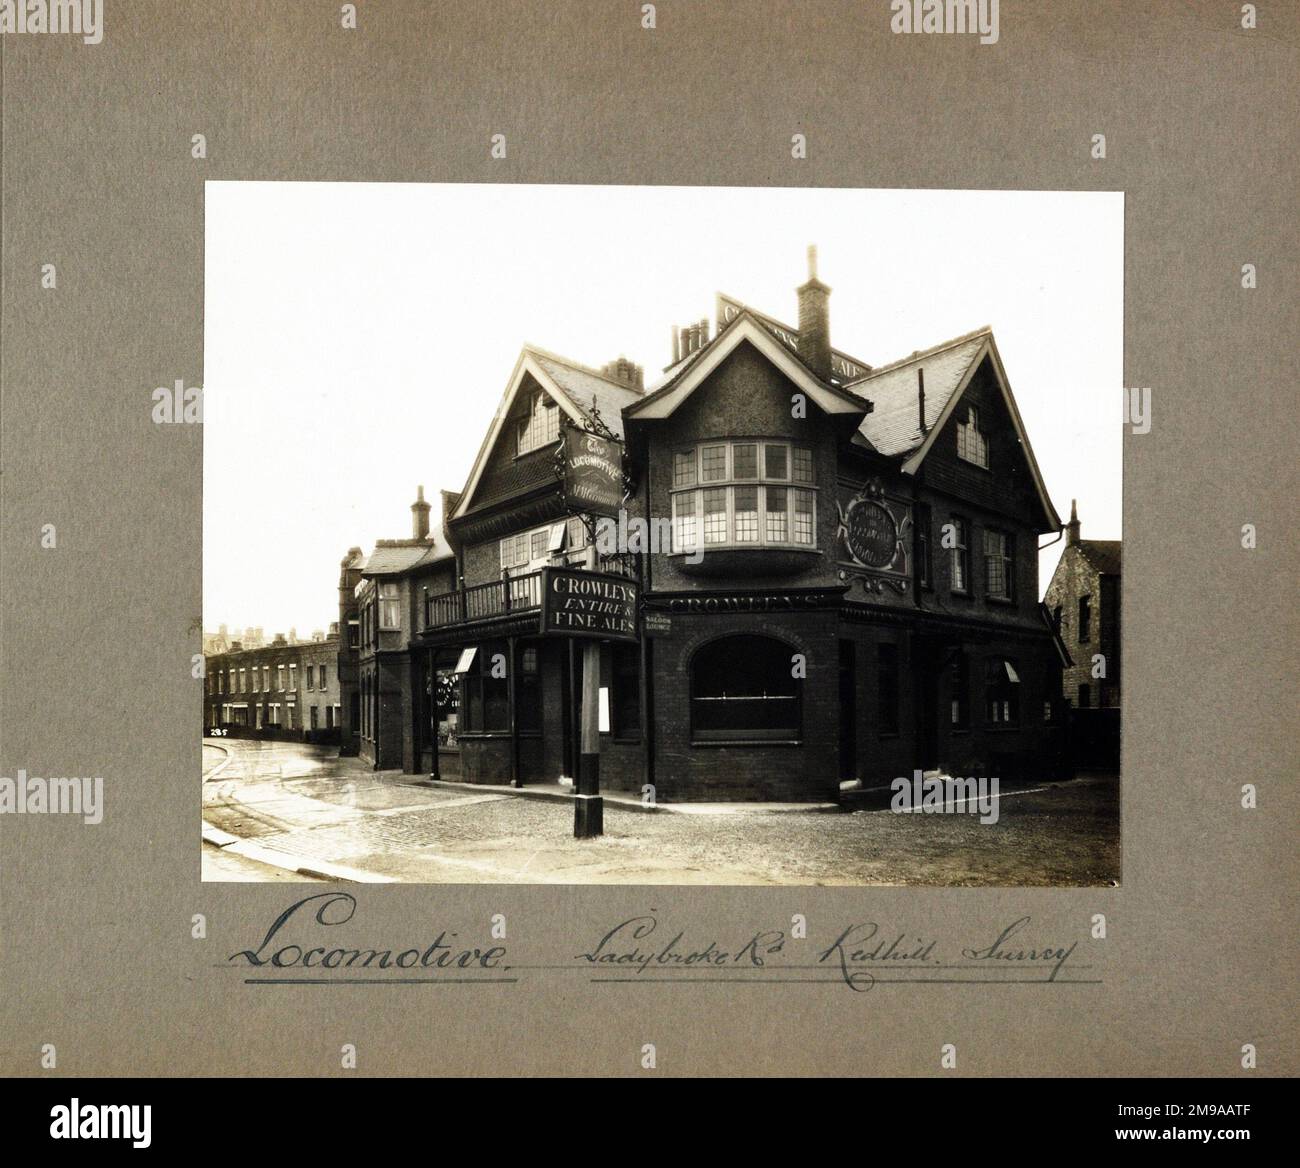 Photograph of Locomotive PH, Redhill, Surrey. The main side of the print (shown here) depicts: Right face on view of the pub.  The back of the print (available on request) details: Nothing for the Locomotive, Redhill, Surrey RH1 1LE. As of July 2018 . Demolished in the 1980s for the development of Redhill town centre Stock Photo